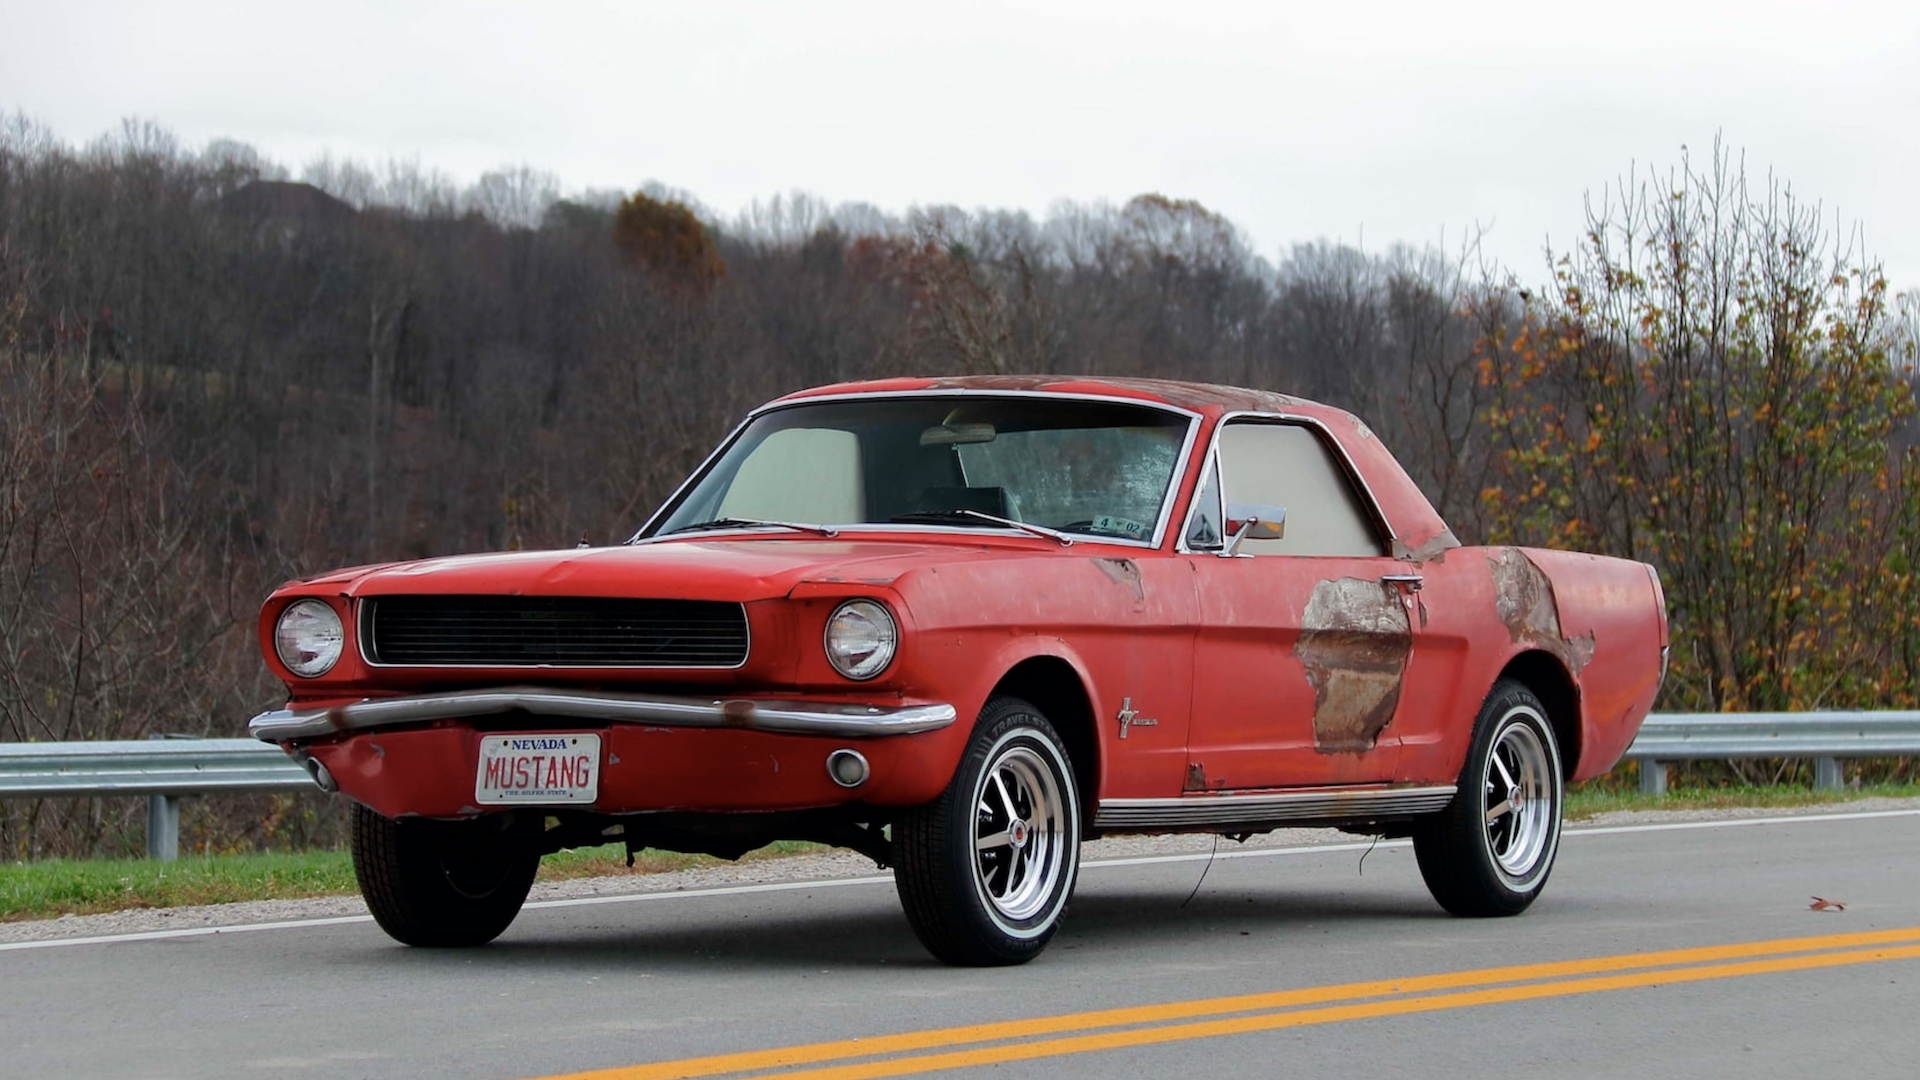 An image of a Ford Mustang Mustero parked outdoors.